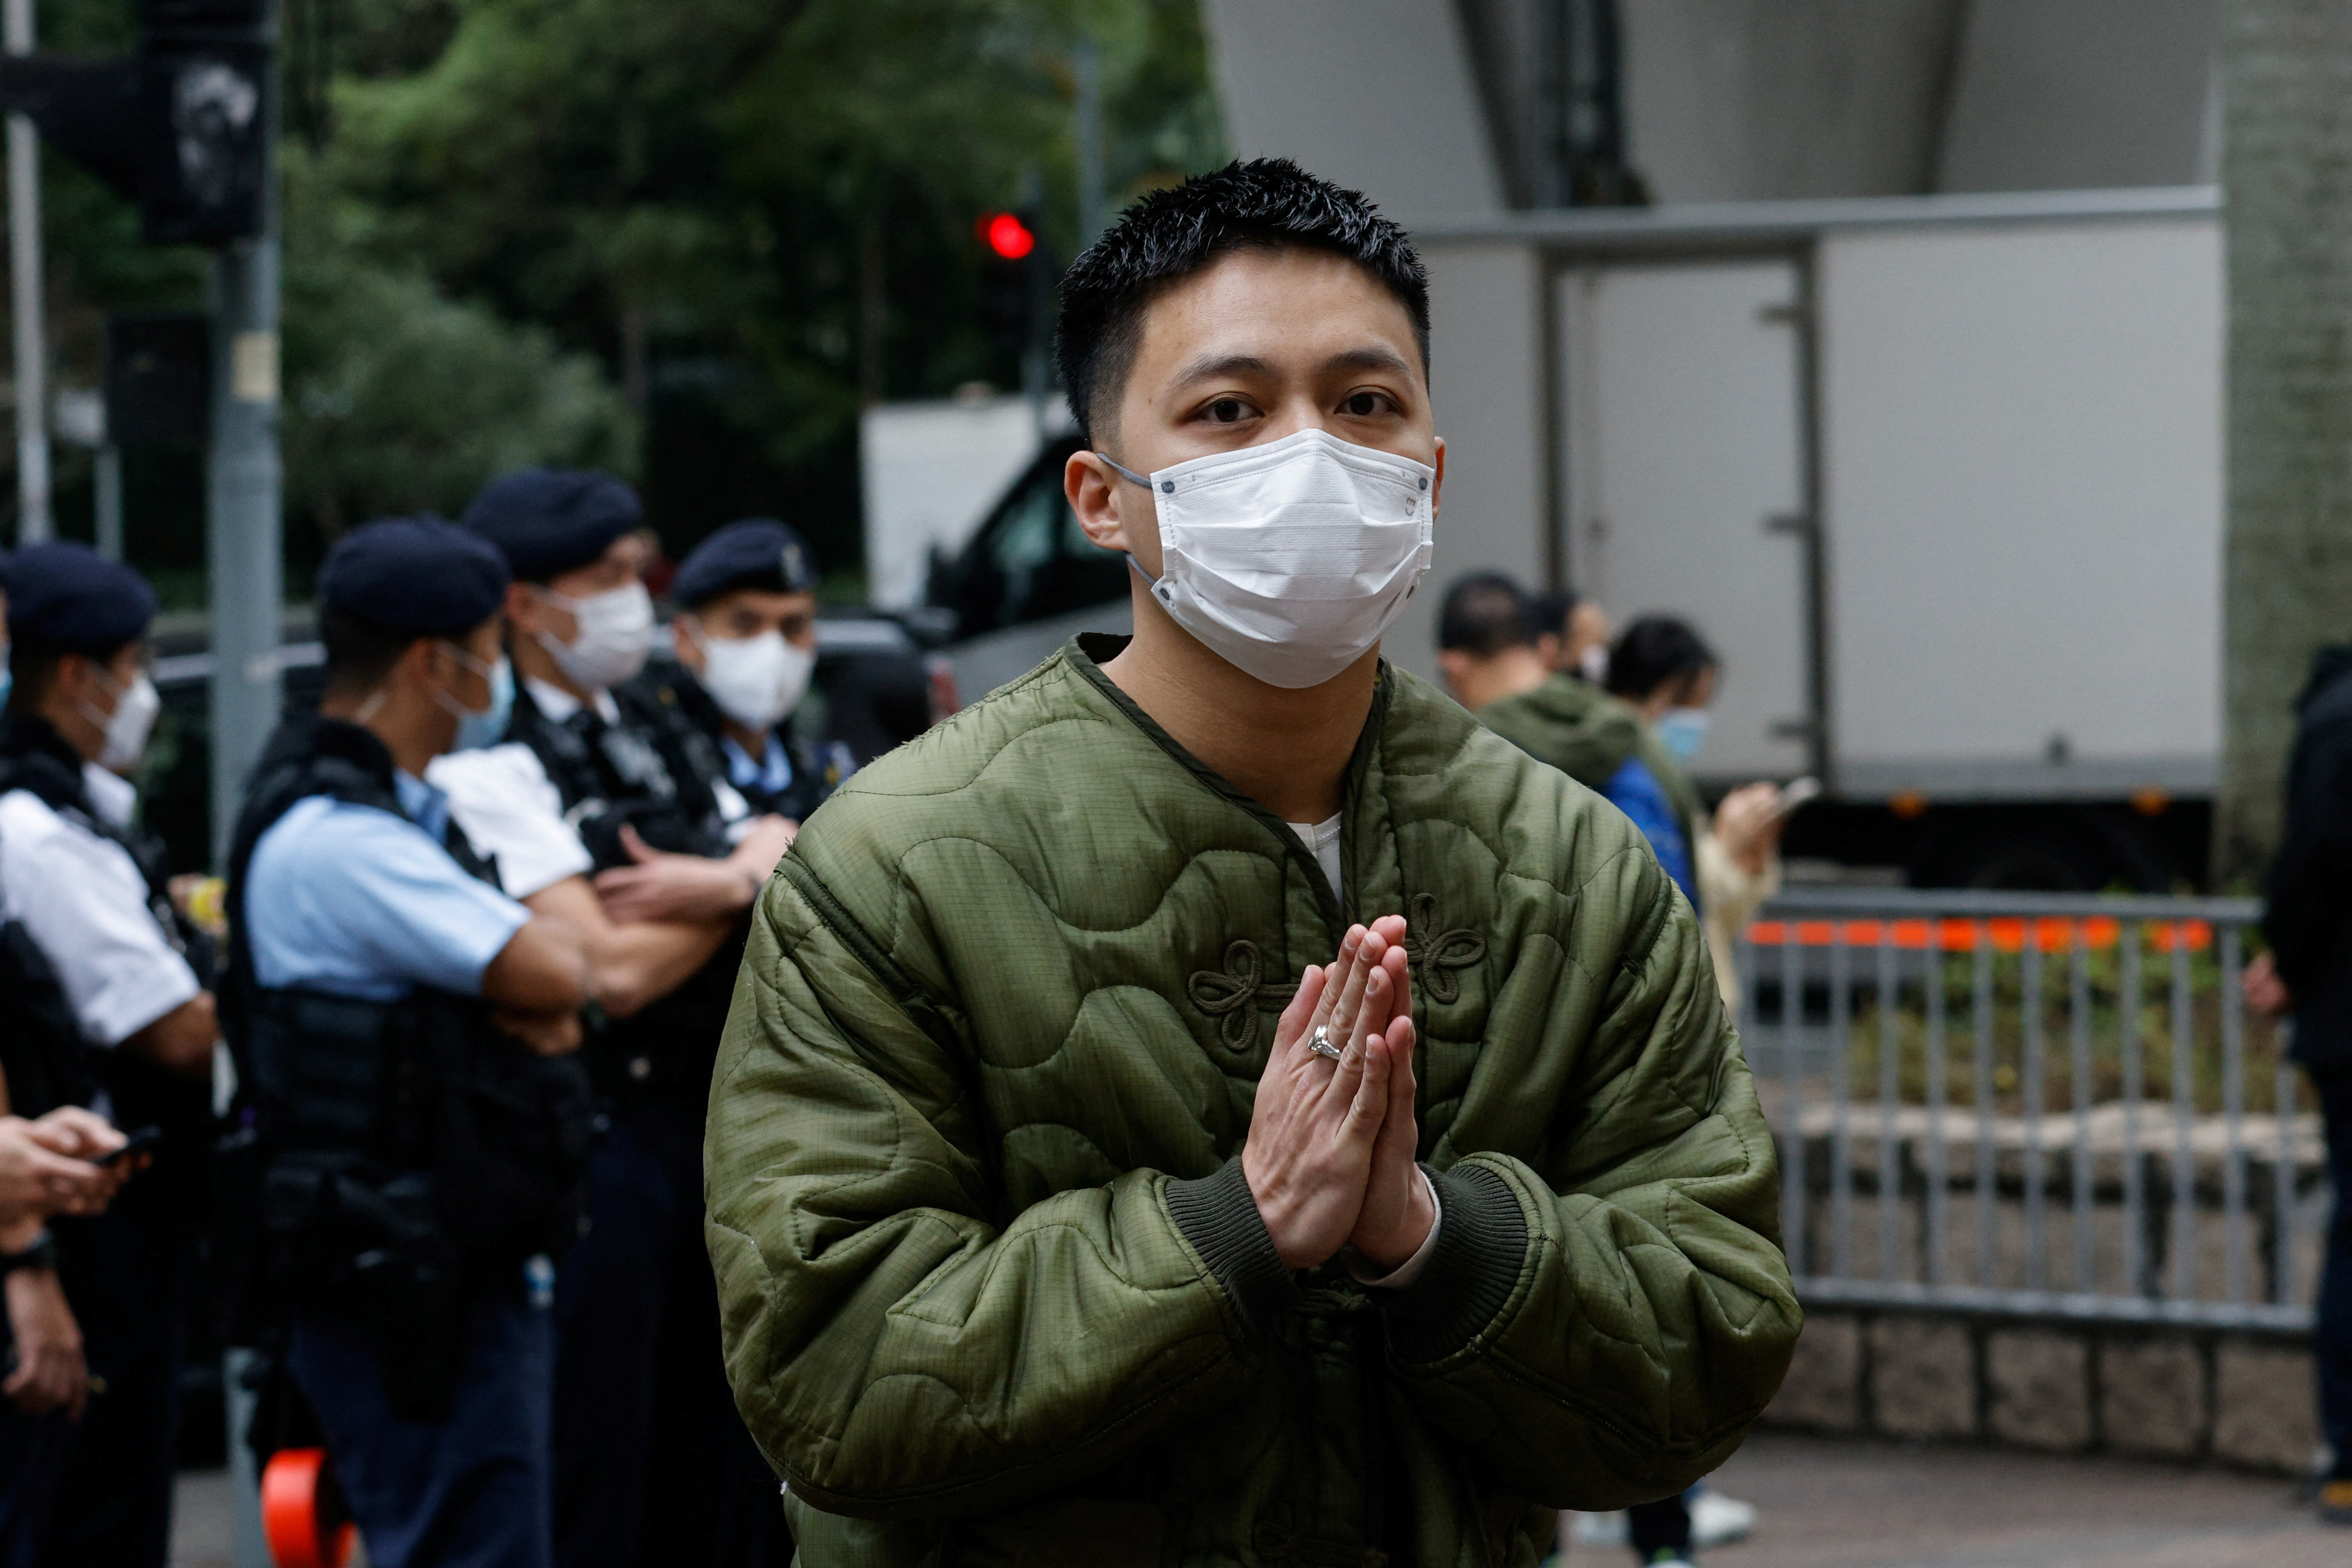 Lee Yue-shun, one of the 47 pro-democracy activists charged with conspiracy to commit subversion under the national security law, arrives at the West Kowloon Magistrates' Courts building in Hong Kong